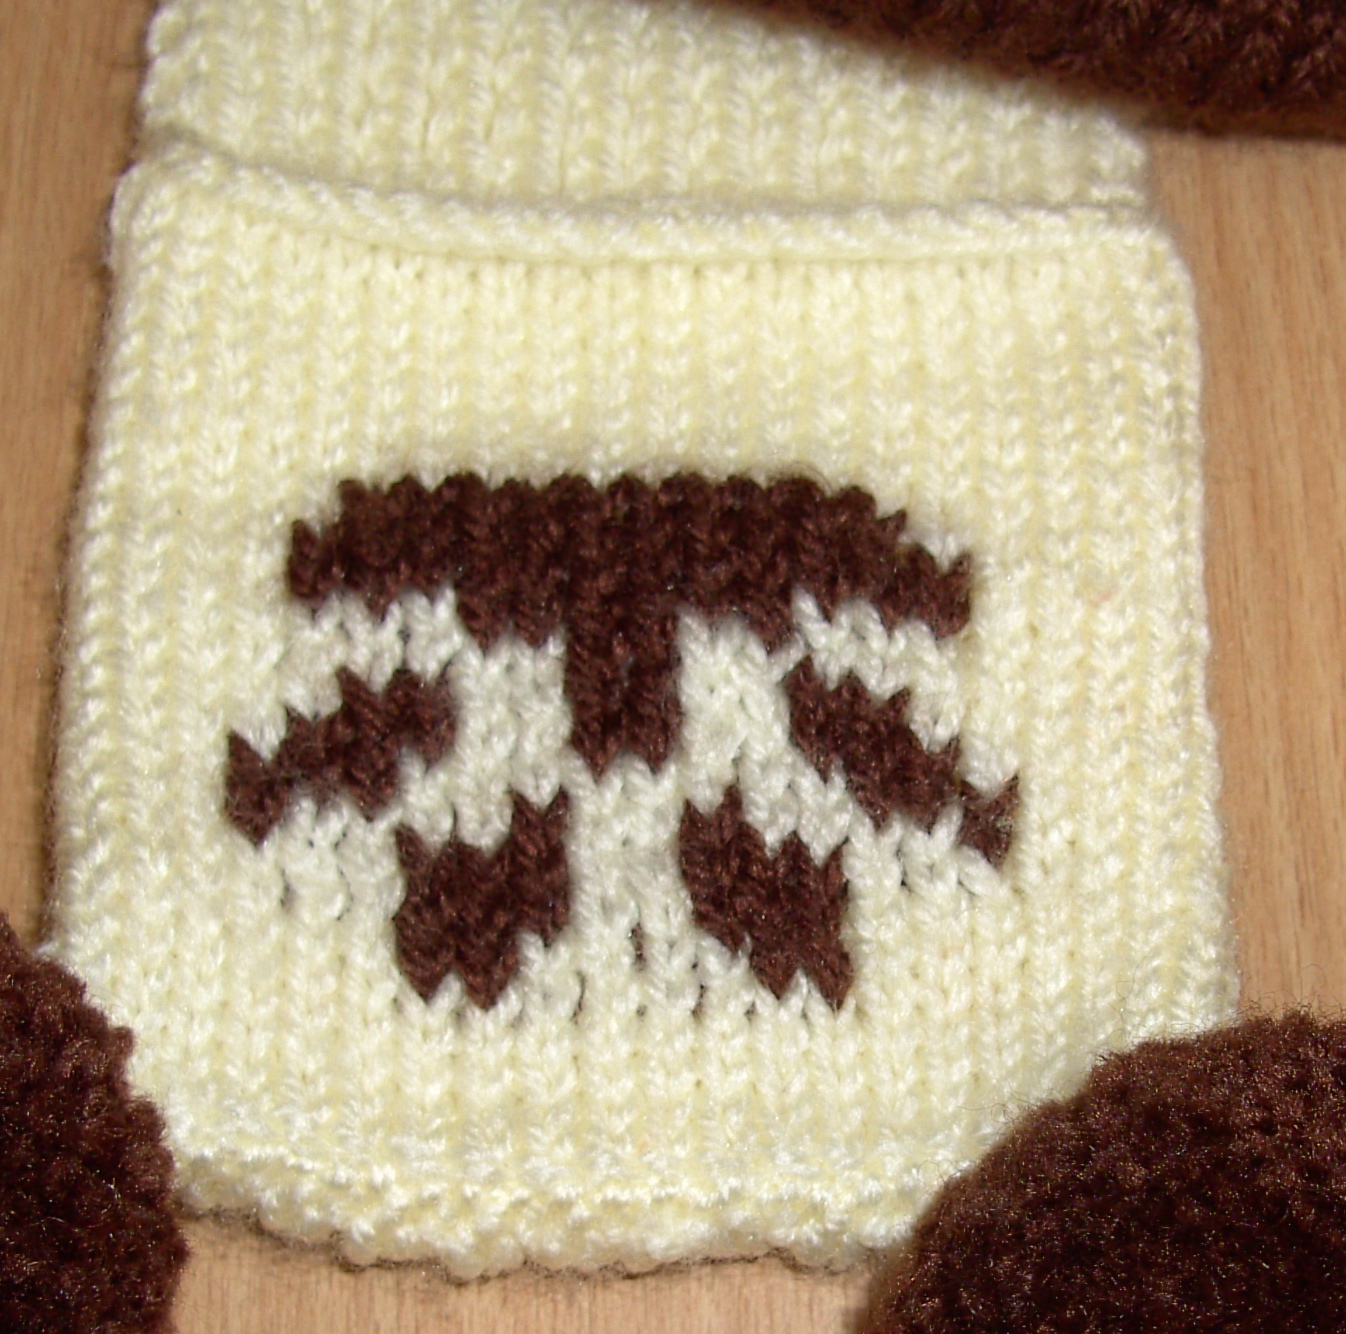 Dog paw print motif on the pockets of the knitted scarf knitsrus